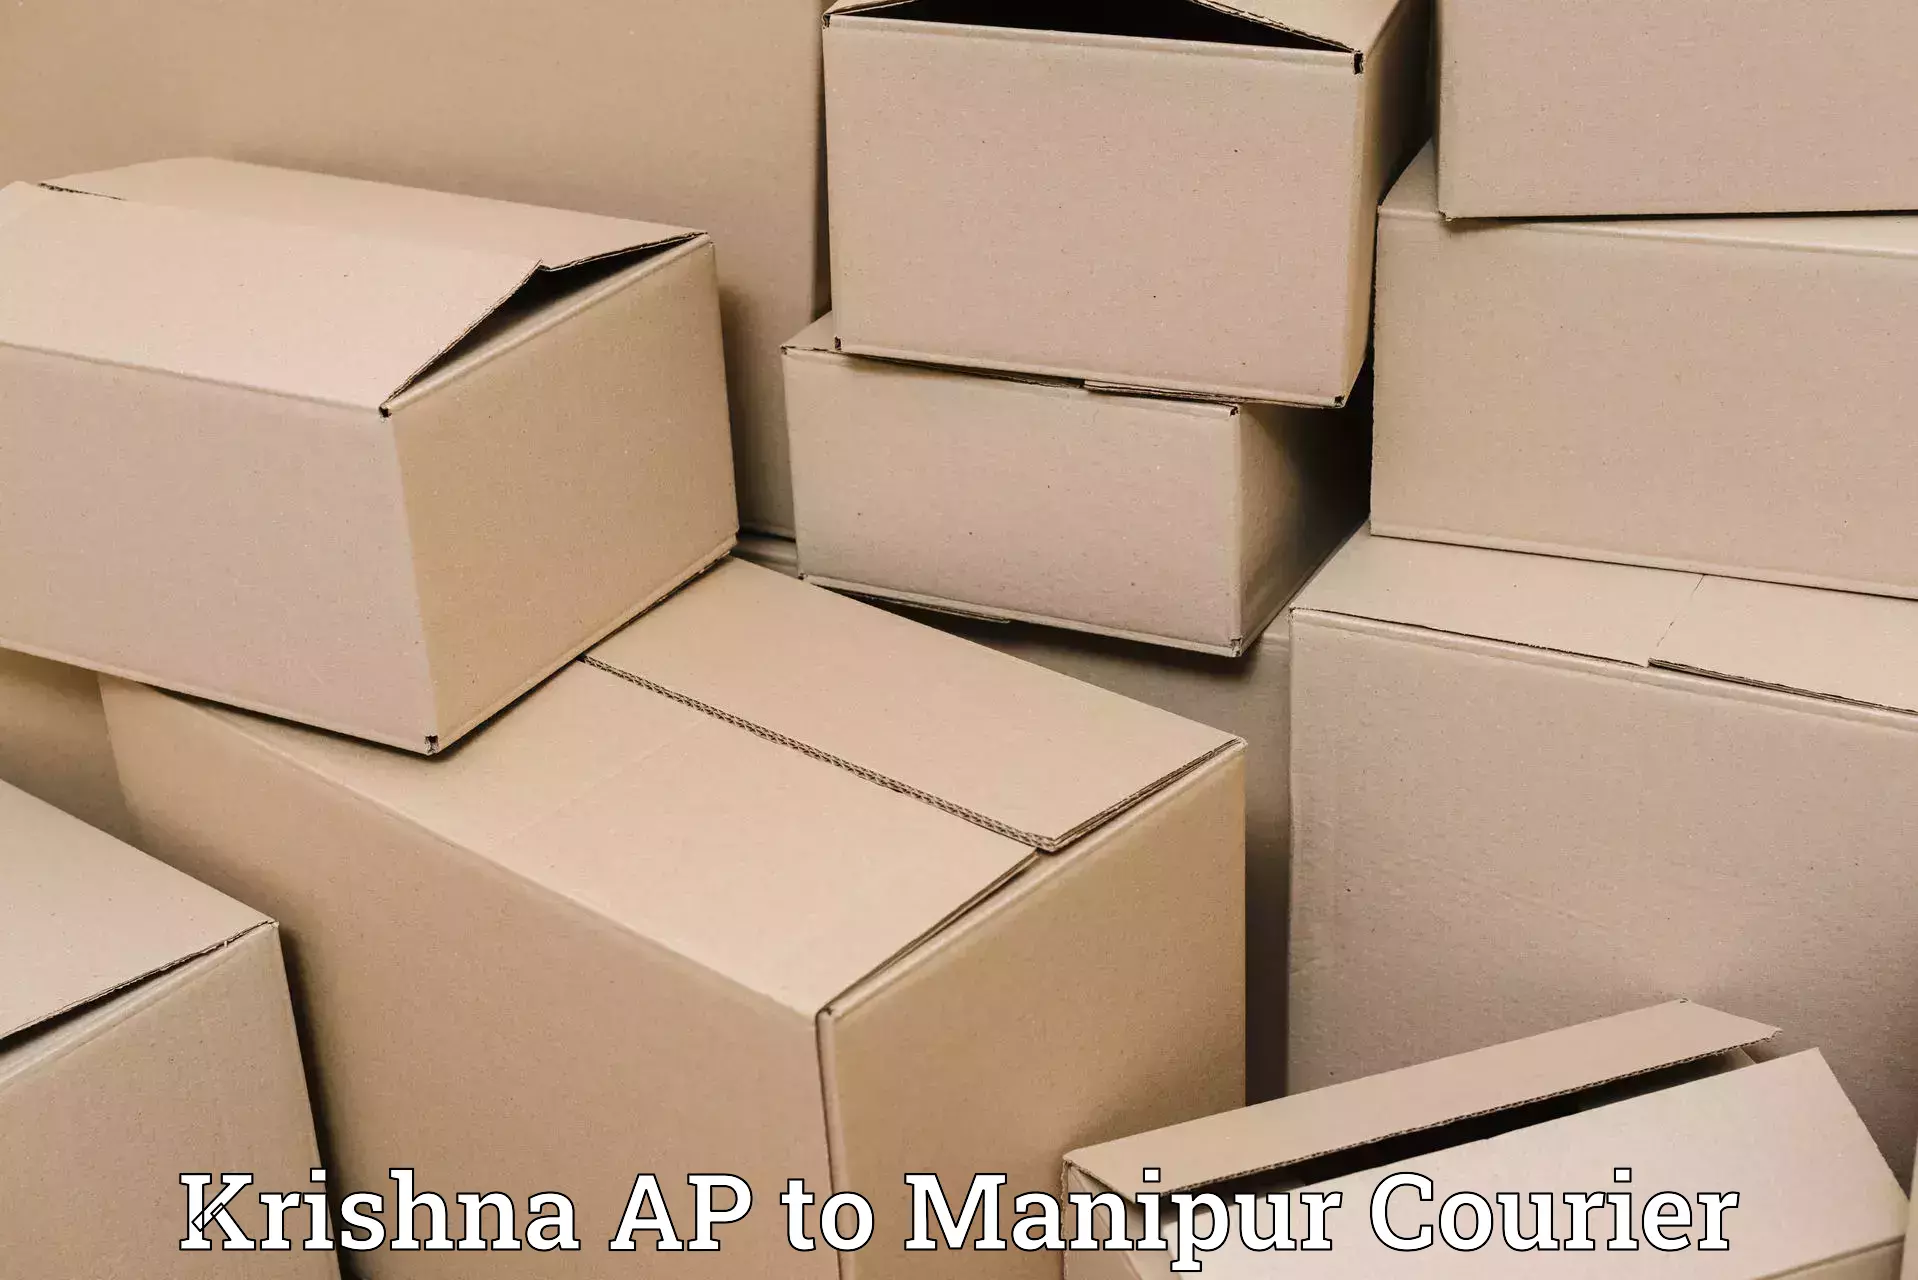 Seamless shipping experience in Krishna AP to Chandel